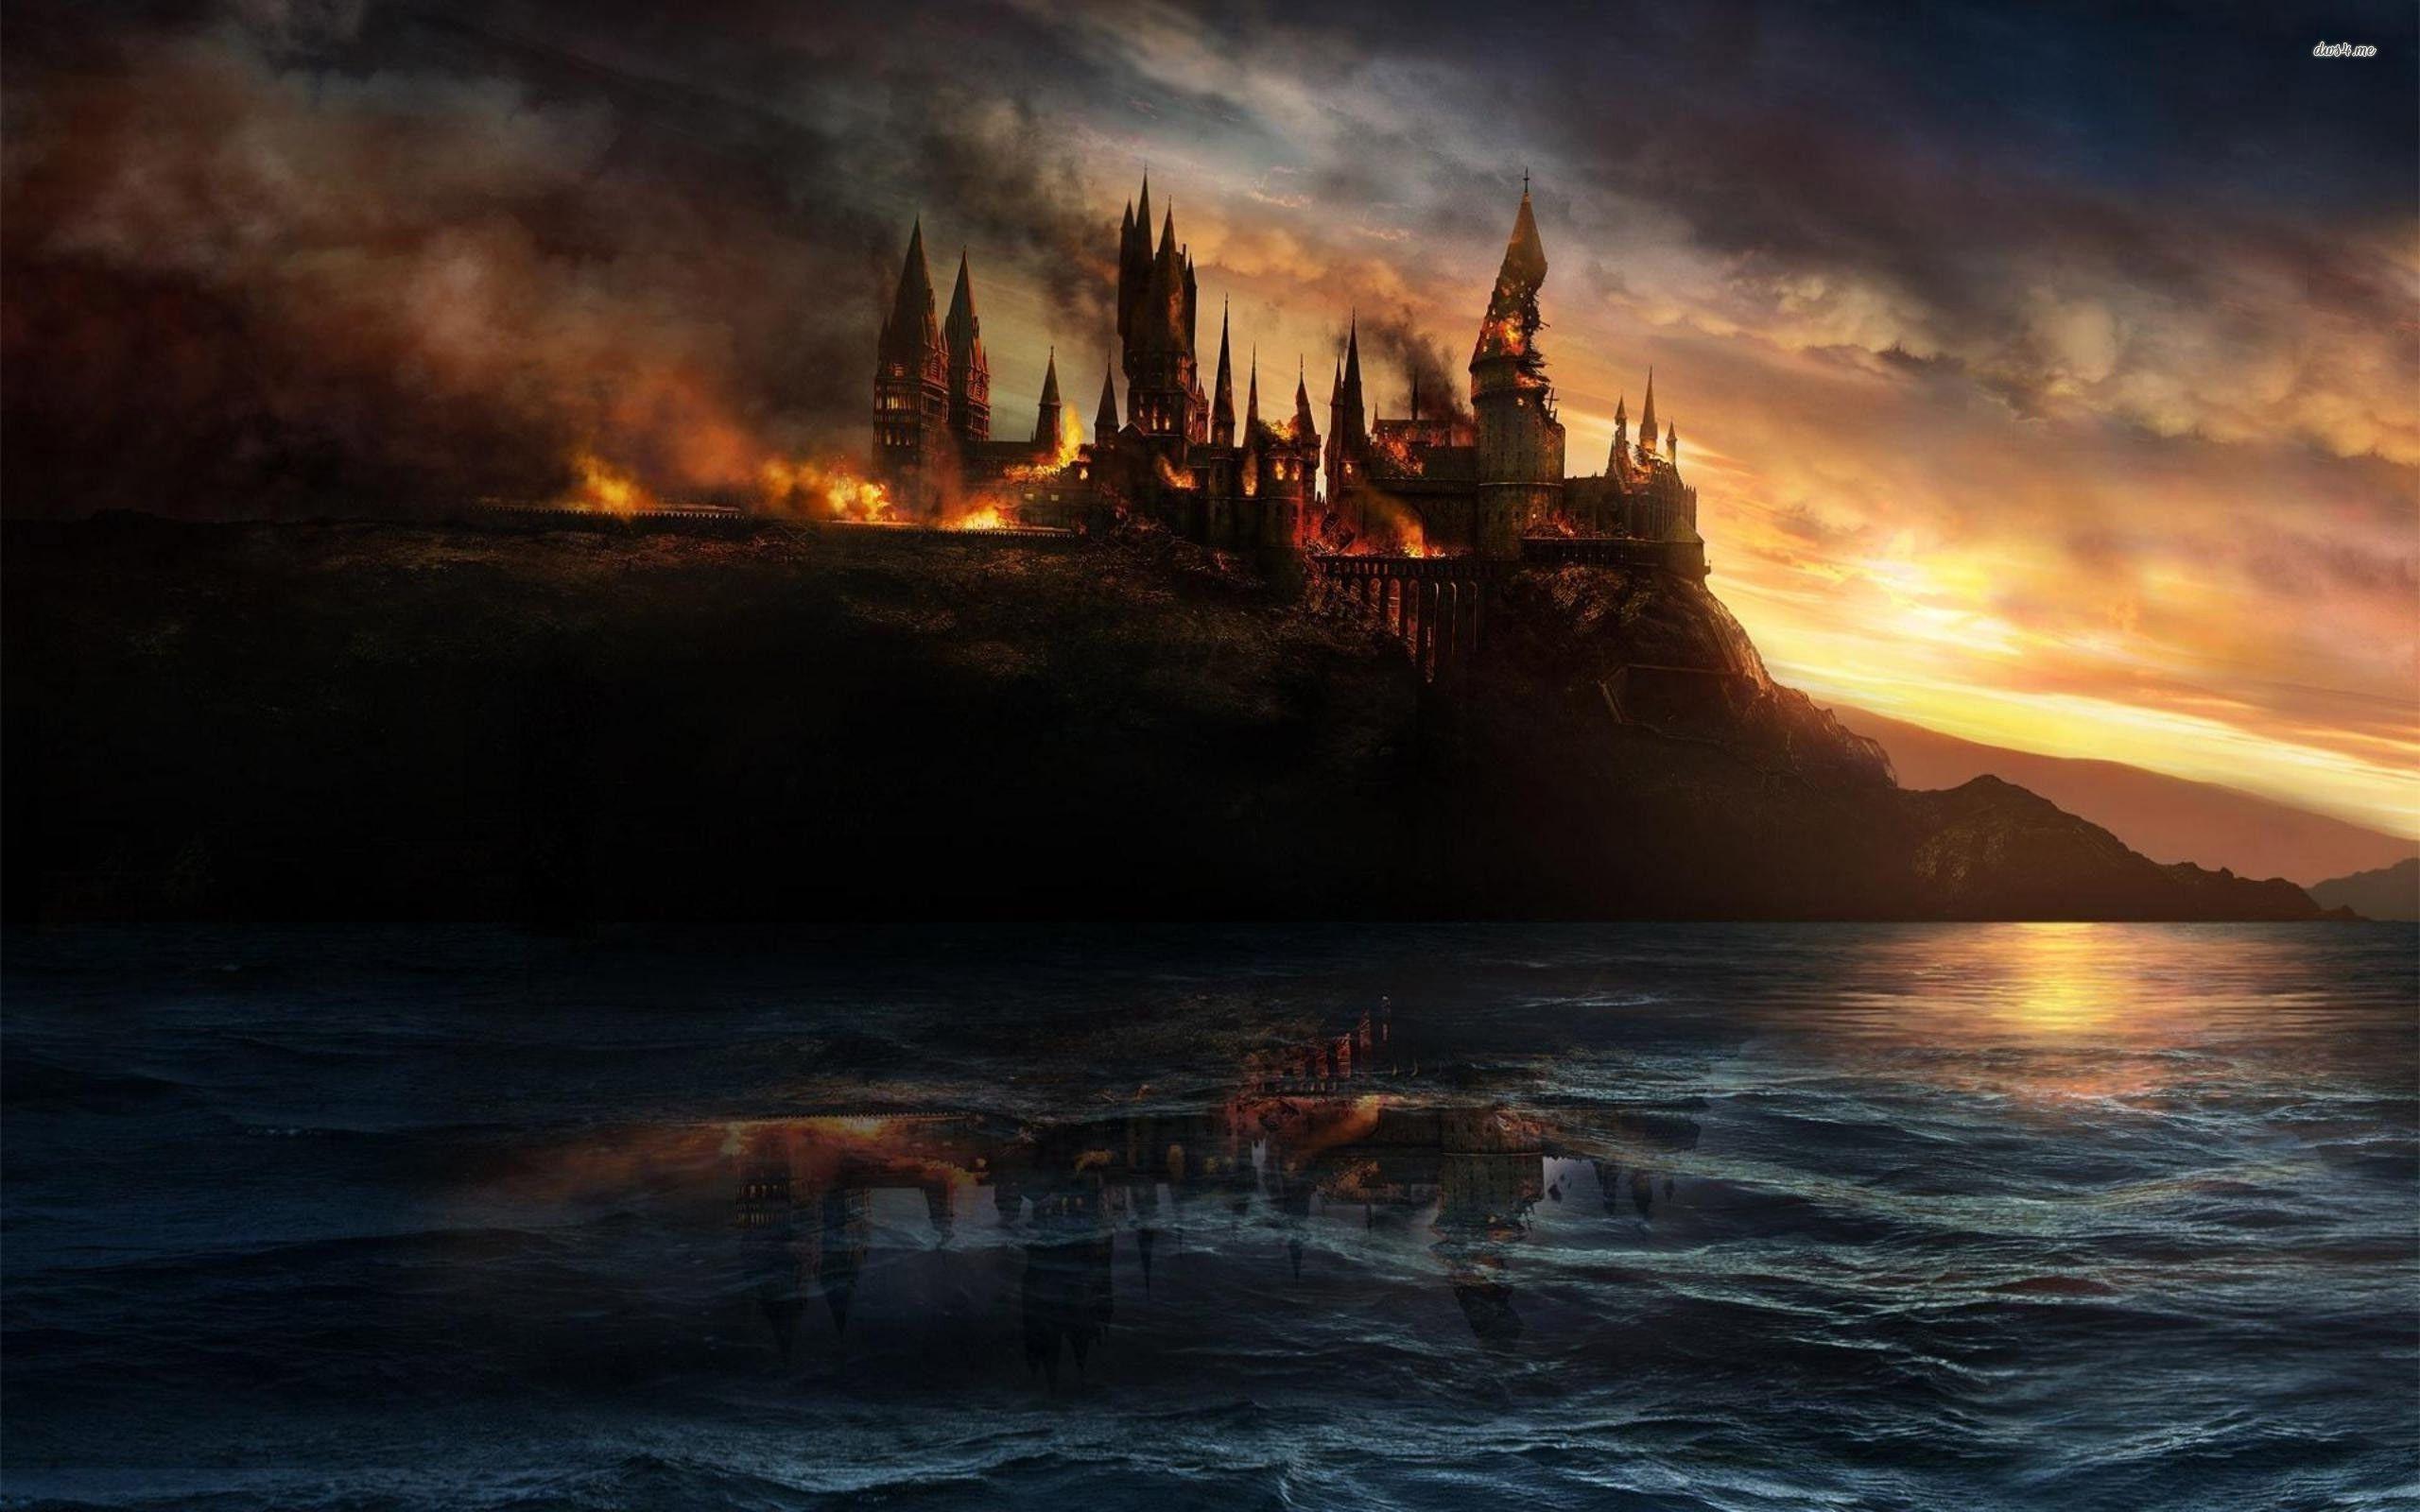 Harry Potter Hd Wallpapers Wallpaper Cave